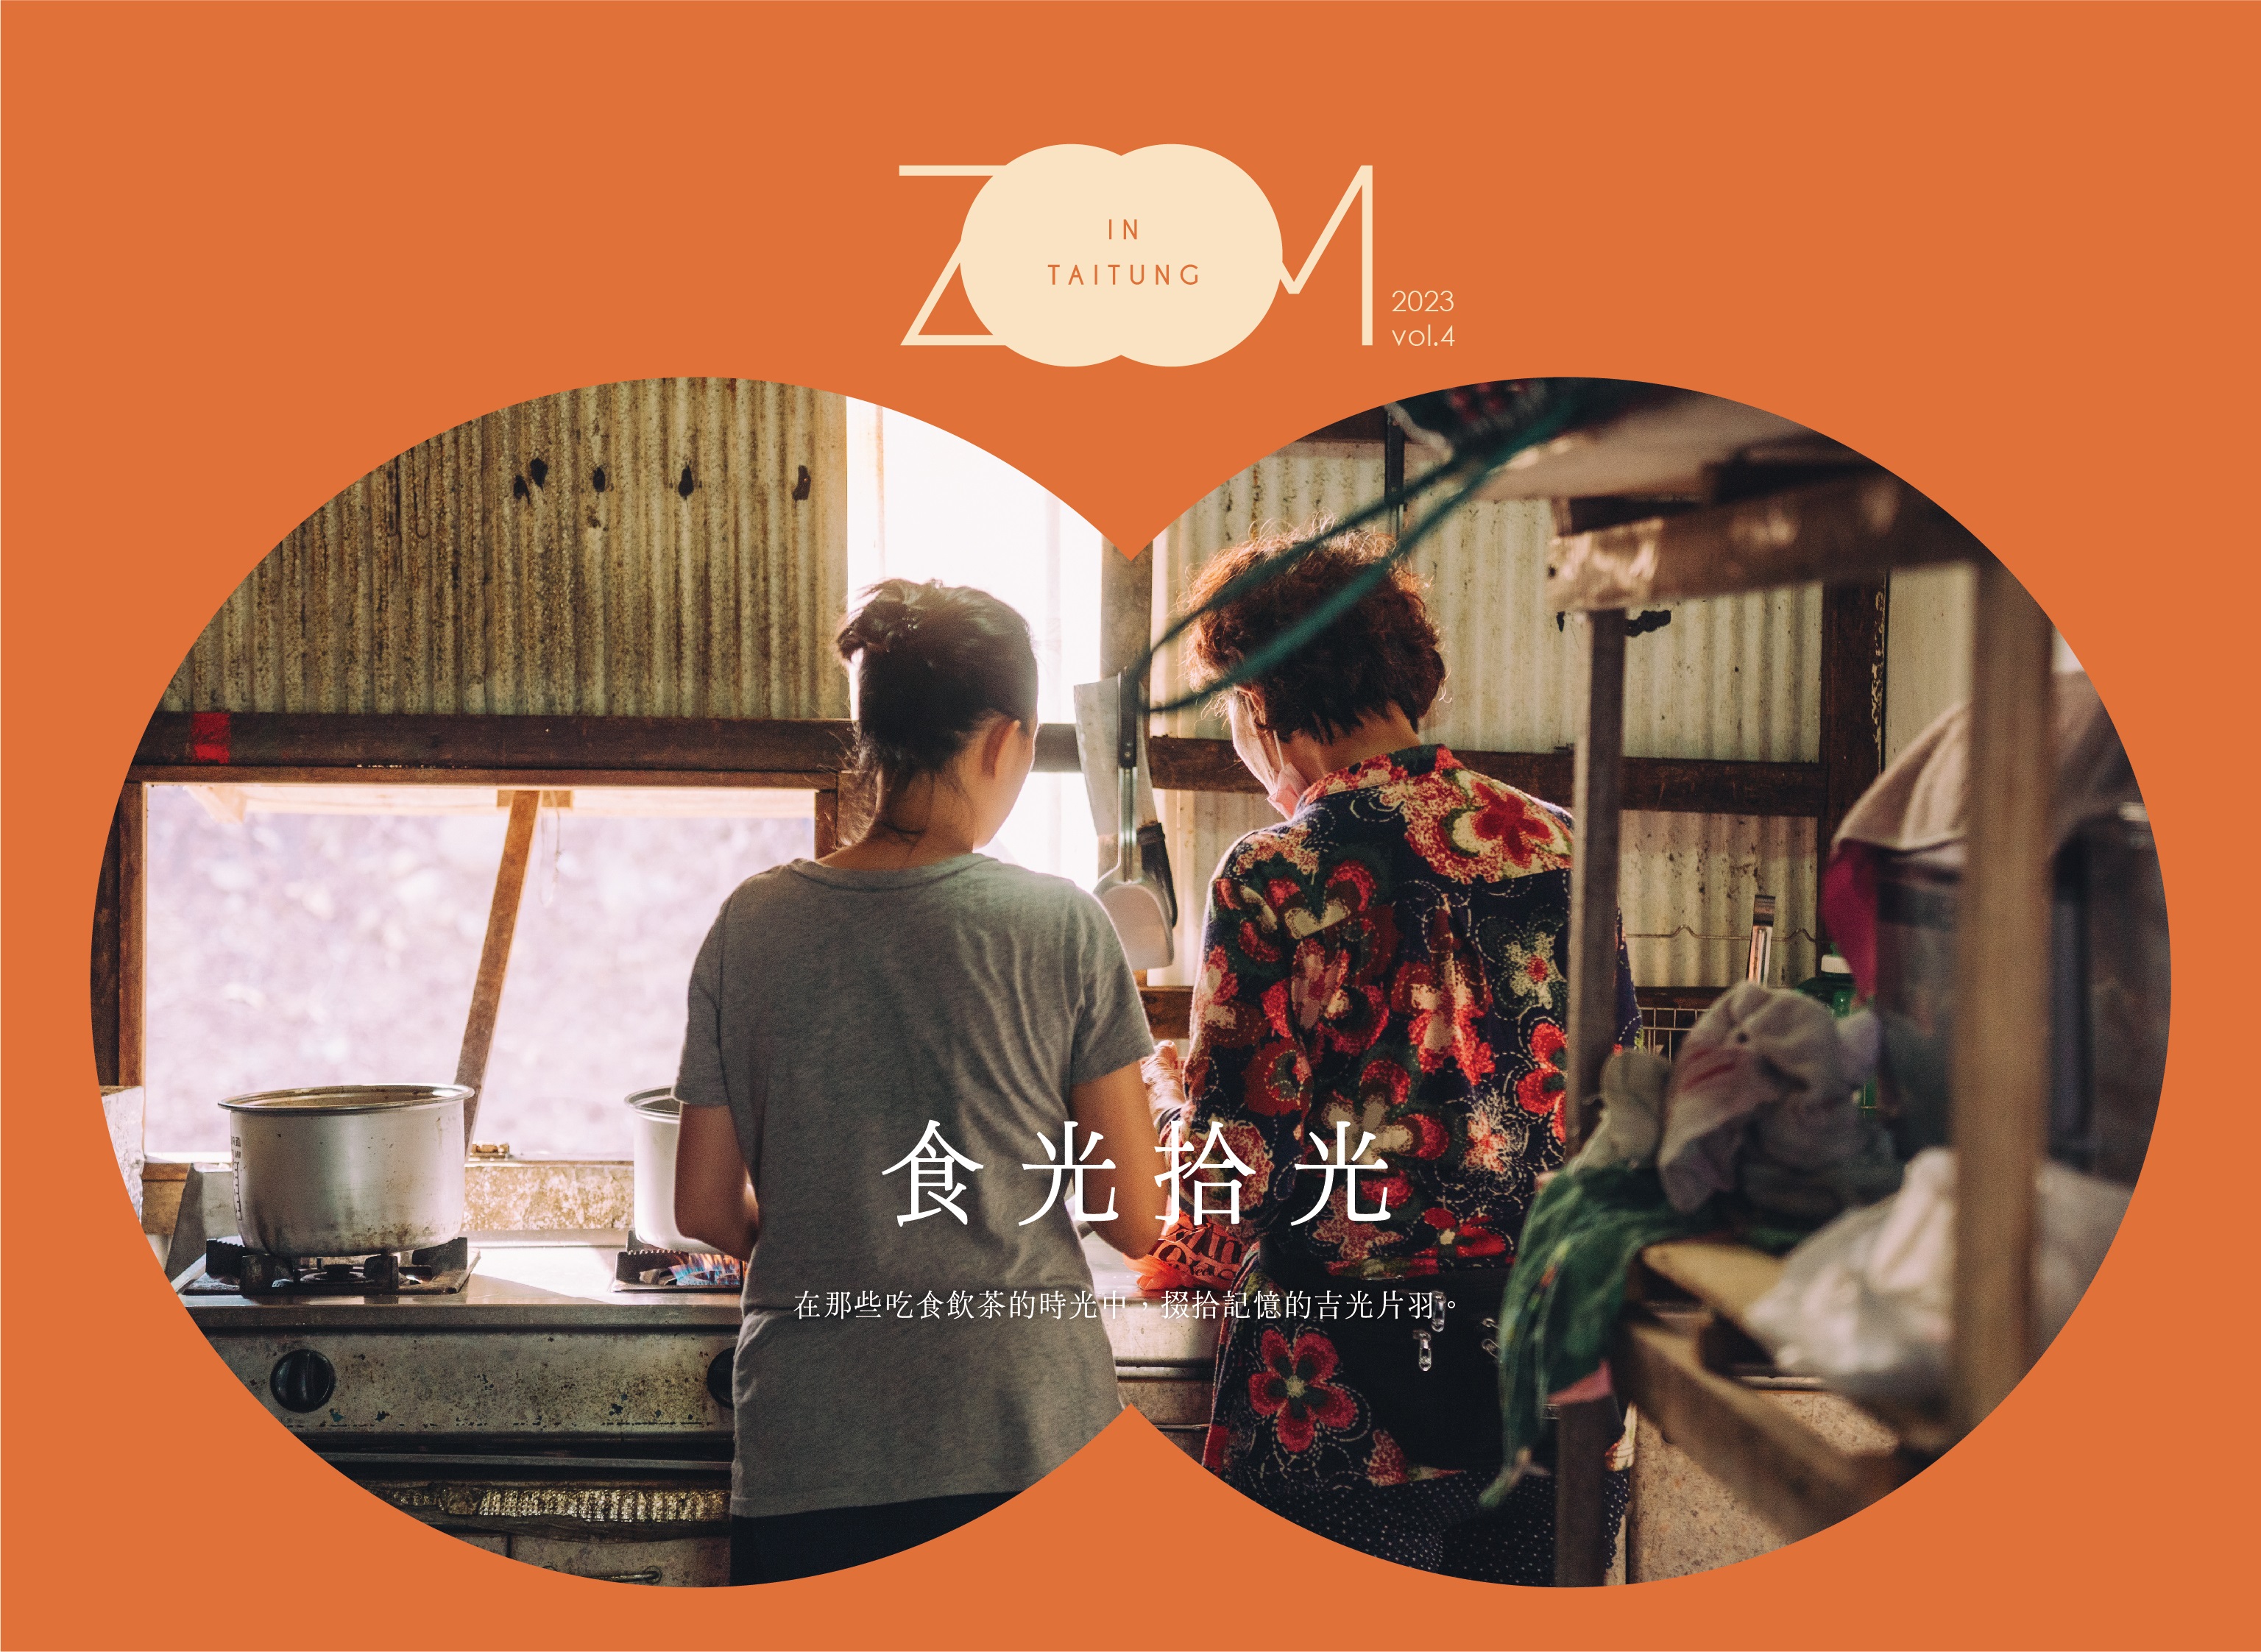 Zoom in Taitung vol.4 